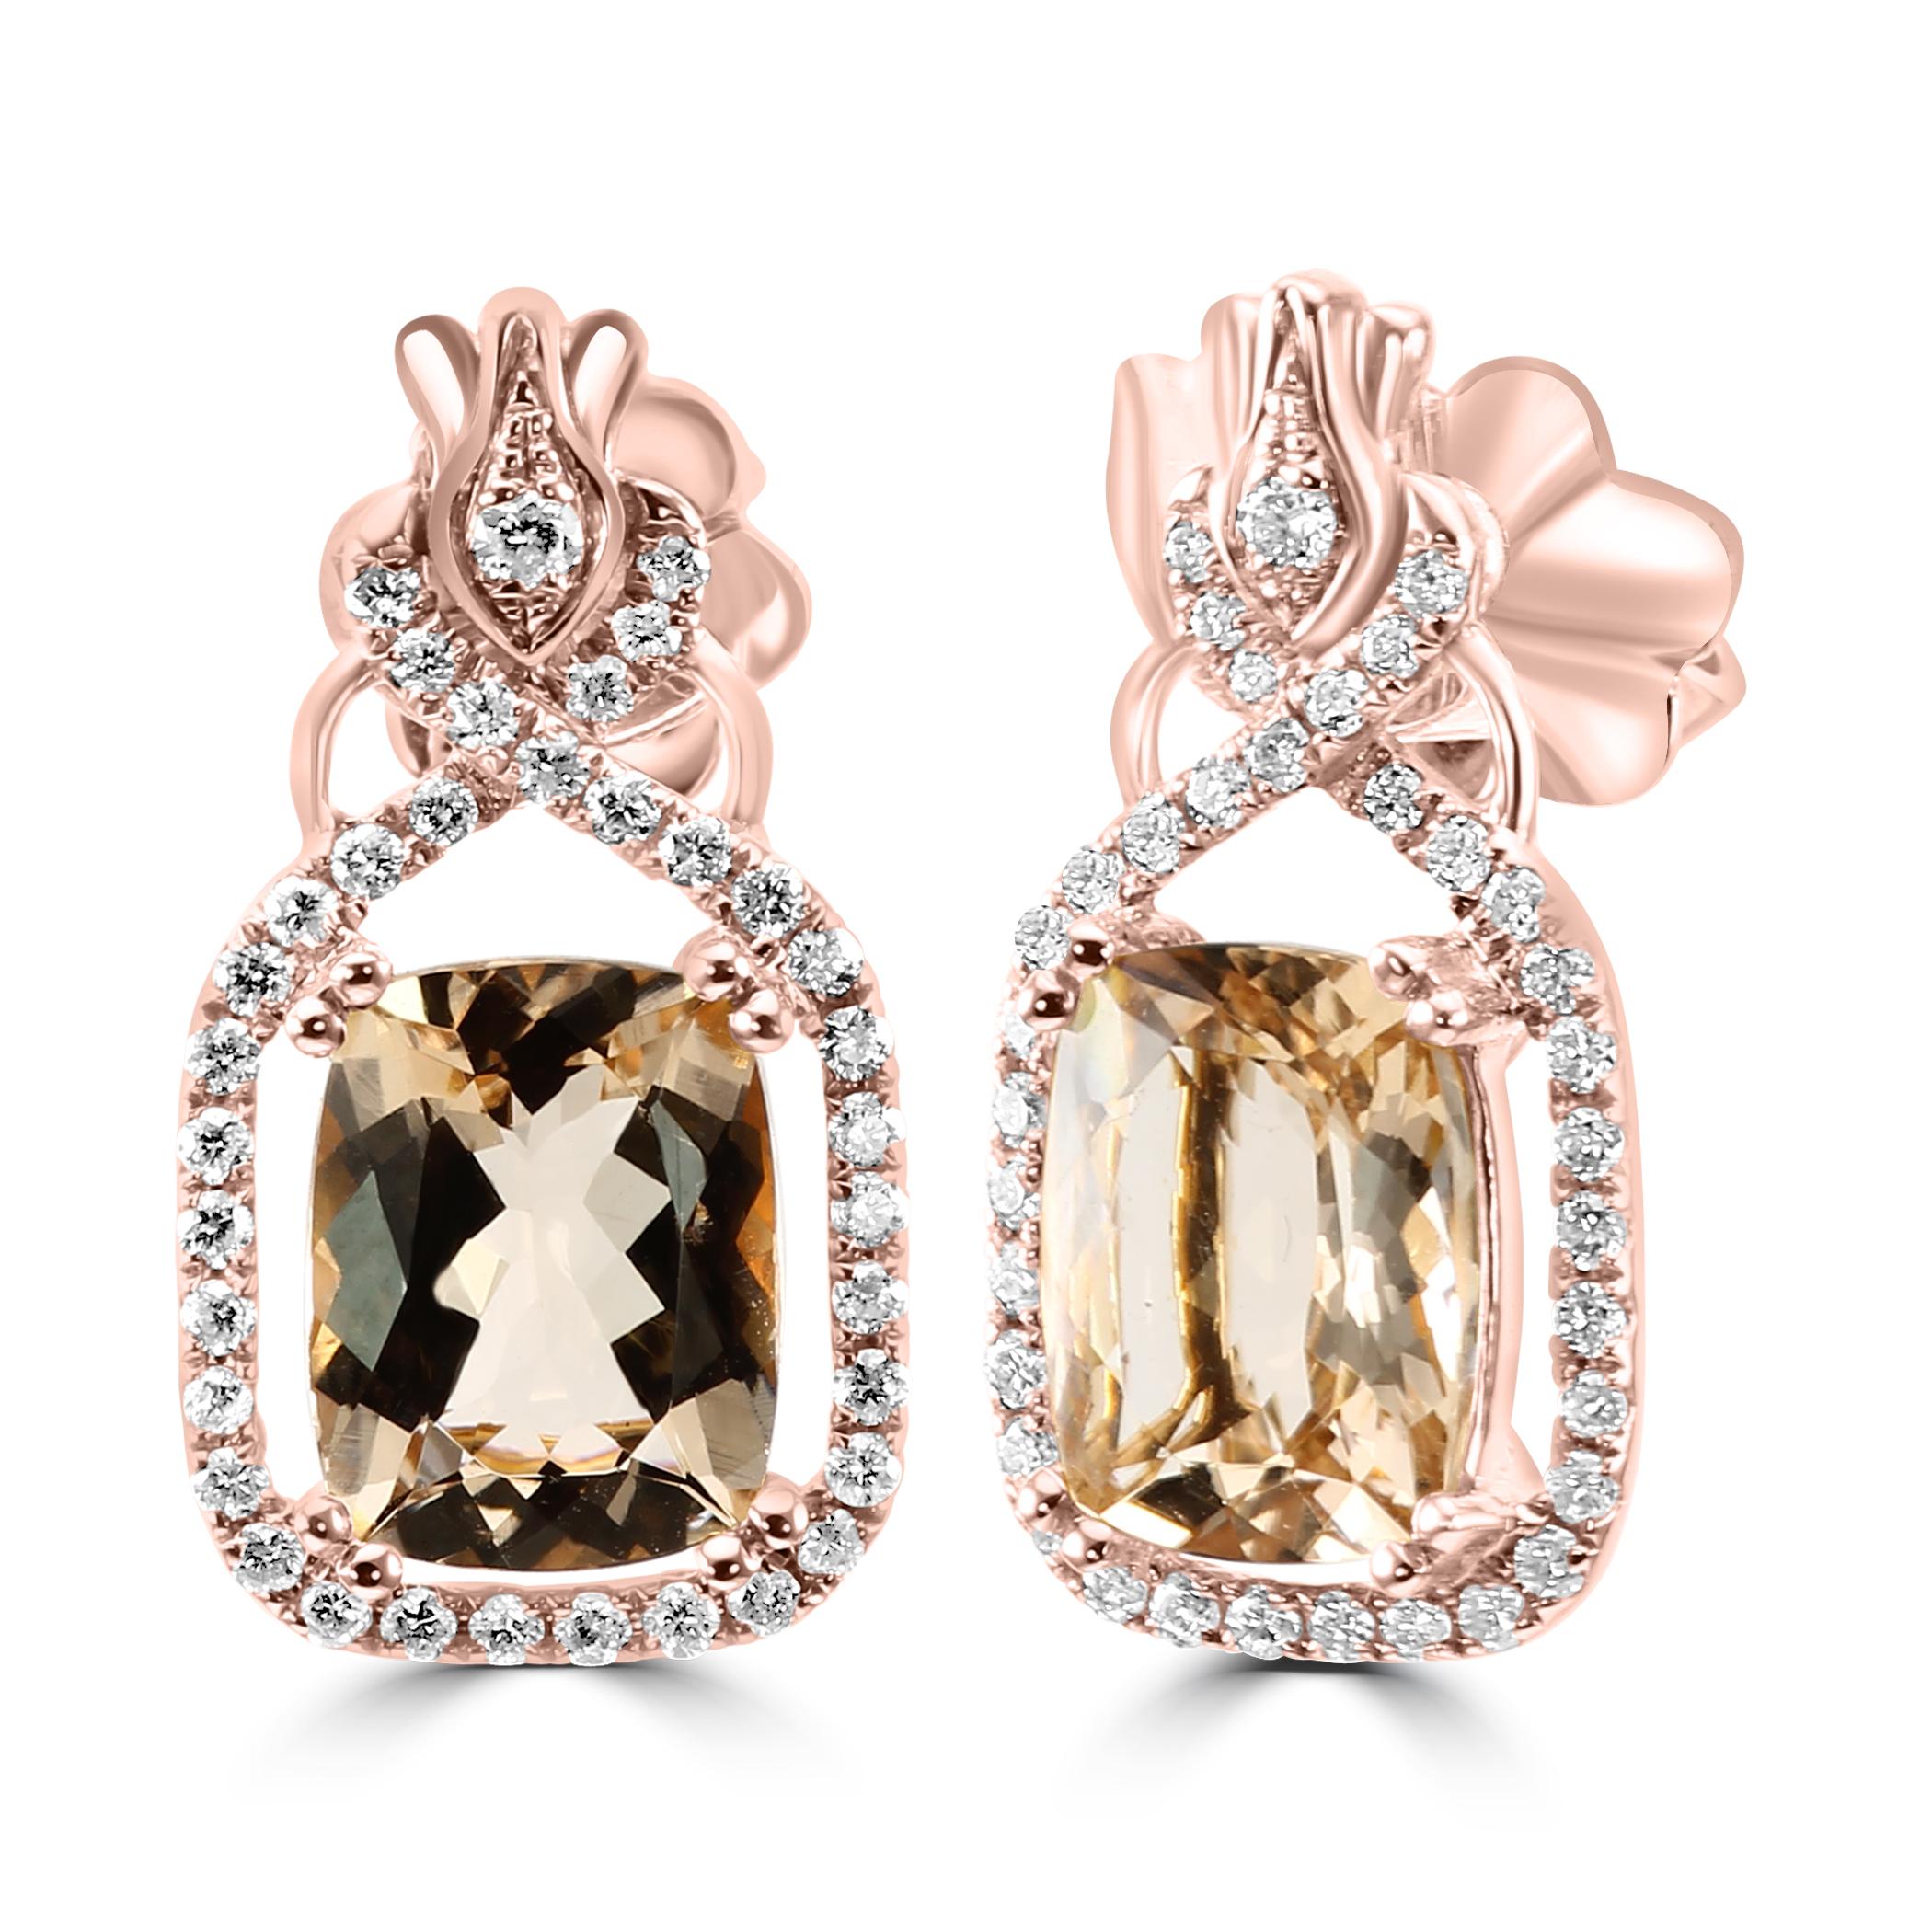 The focal point of these earrings is the resplendent Morganite center, known for its enchanting peach-pink hue and substantial size of 3.78 carats. This gemstone symbolizes love and tenderness, adding a touch of romance to the design.

Surrounding